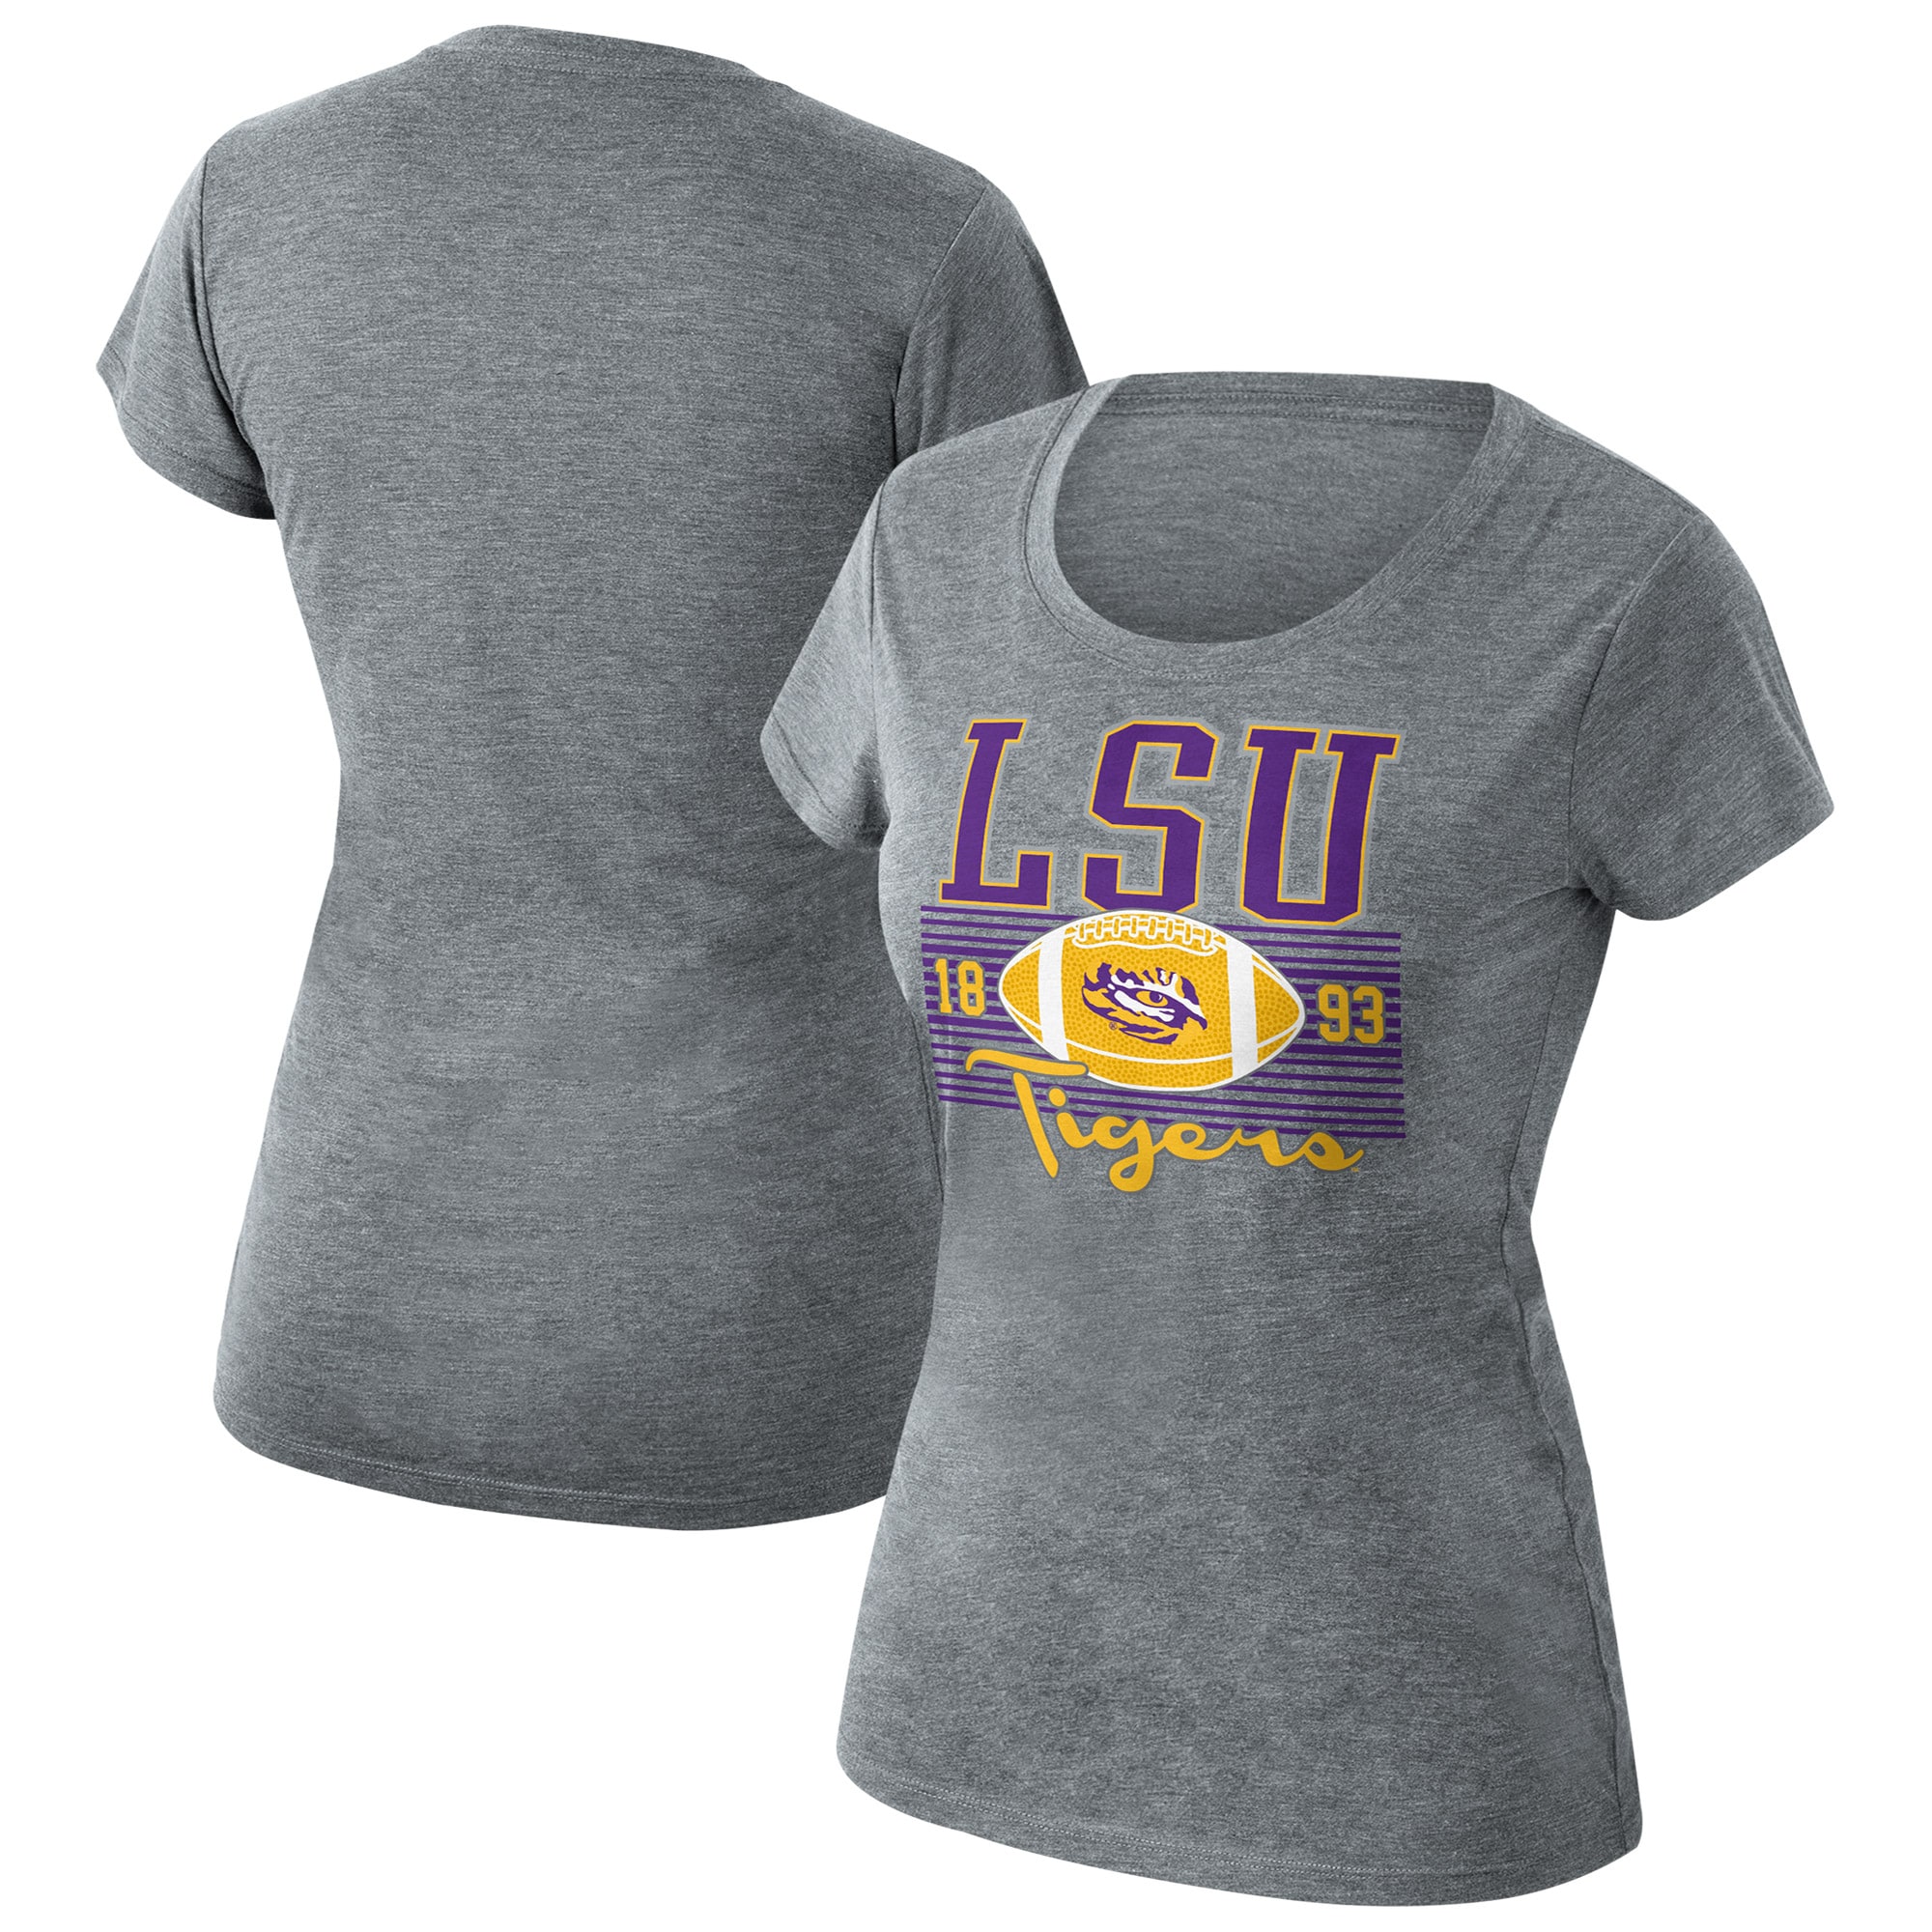 Women's Heathered Gray LSU Tigers Sideline Scoop Neck T-Shirt - image 1 of 3